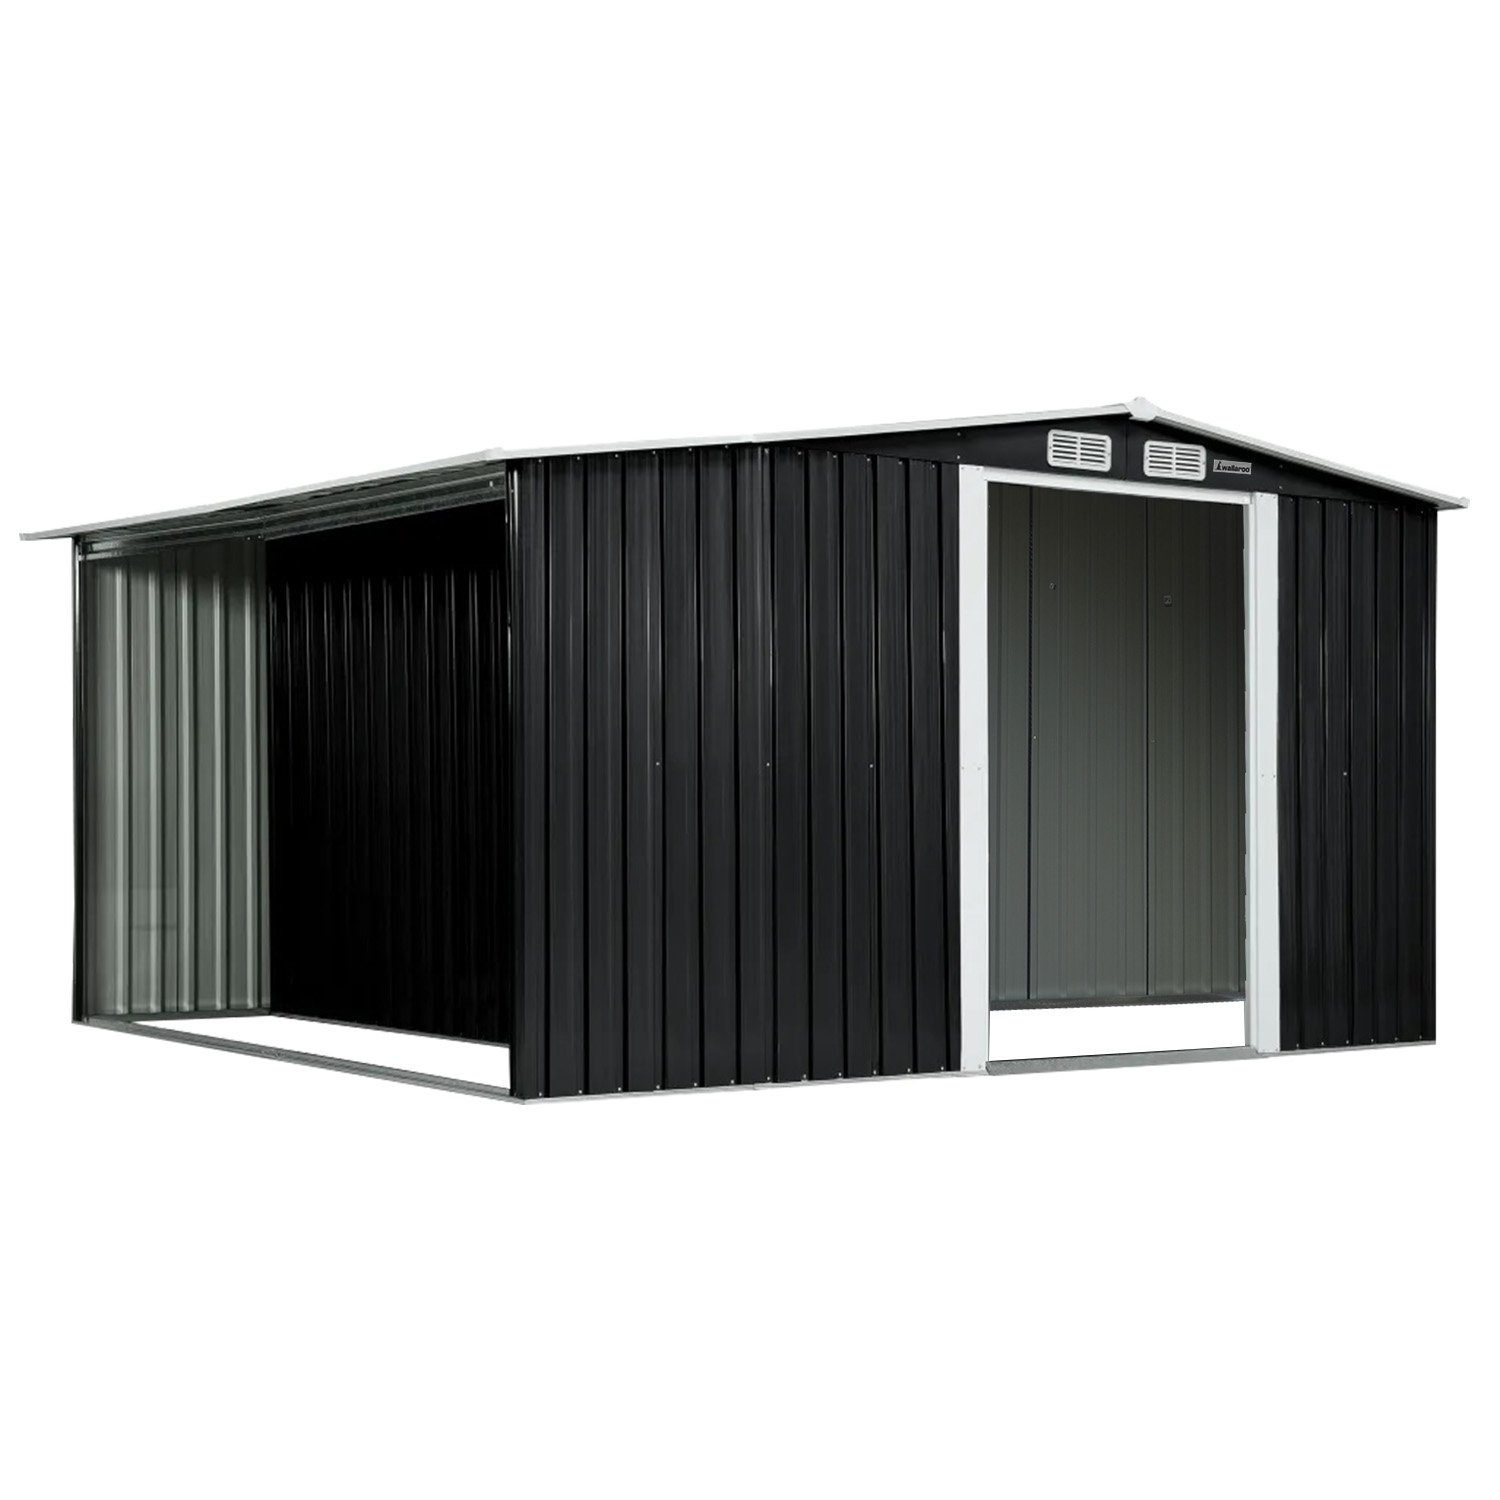 Wallaroo Garden Shed with Semi-Closed Storage 10*8FT - Black 2